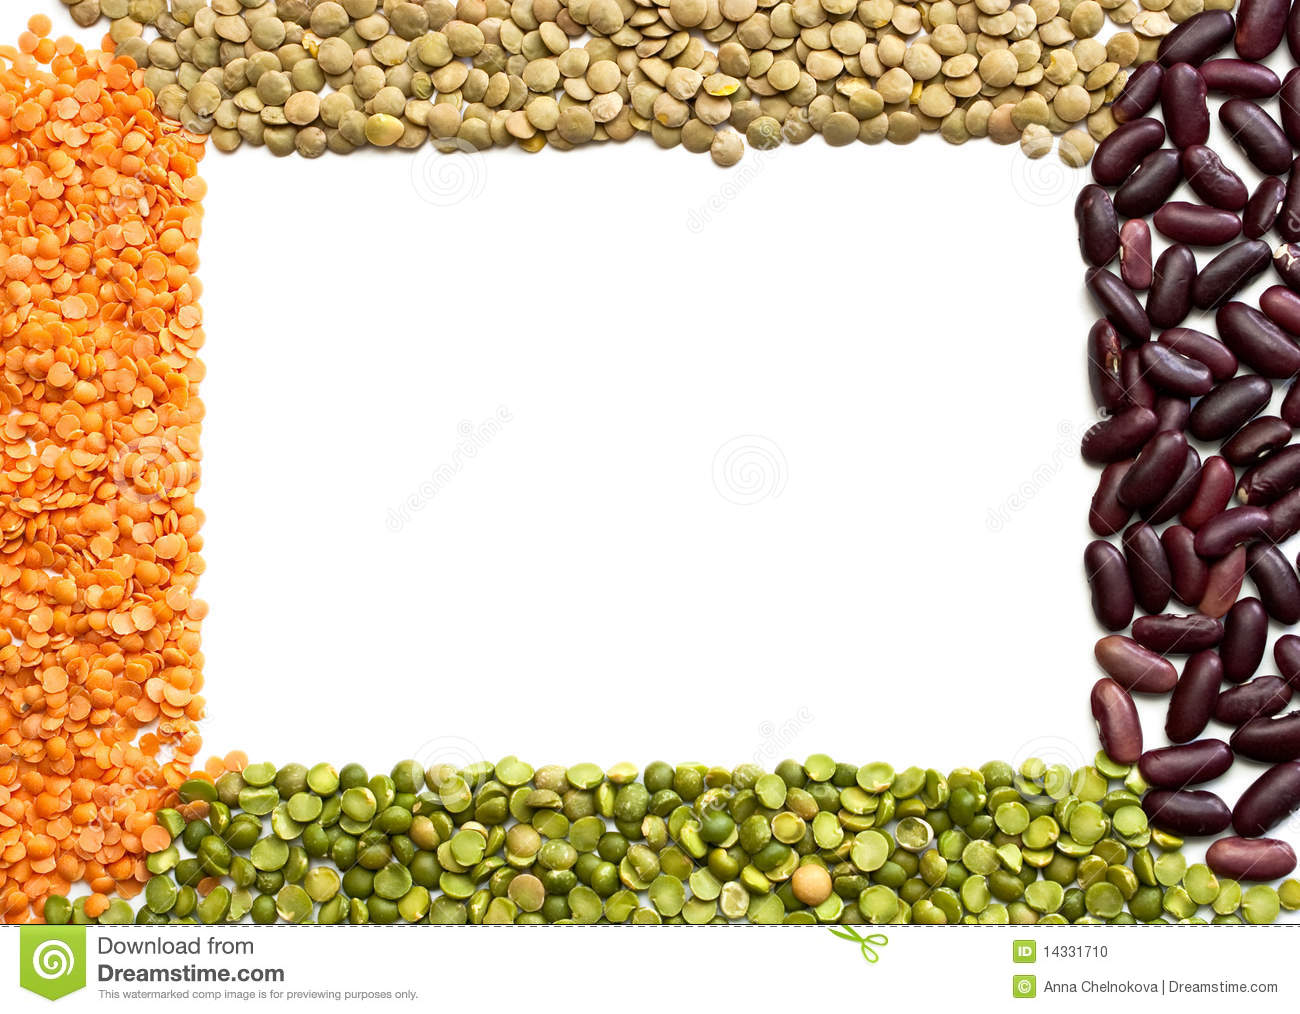 Multicolored Mixed Dried Beans On A White Background  Frame 